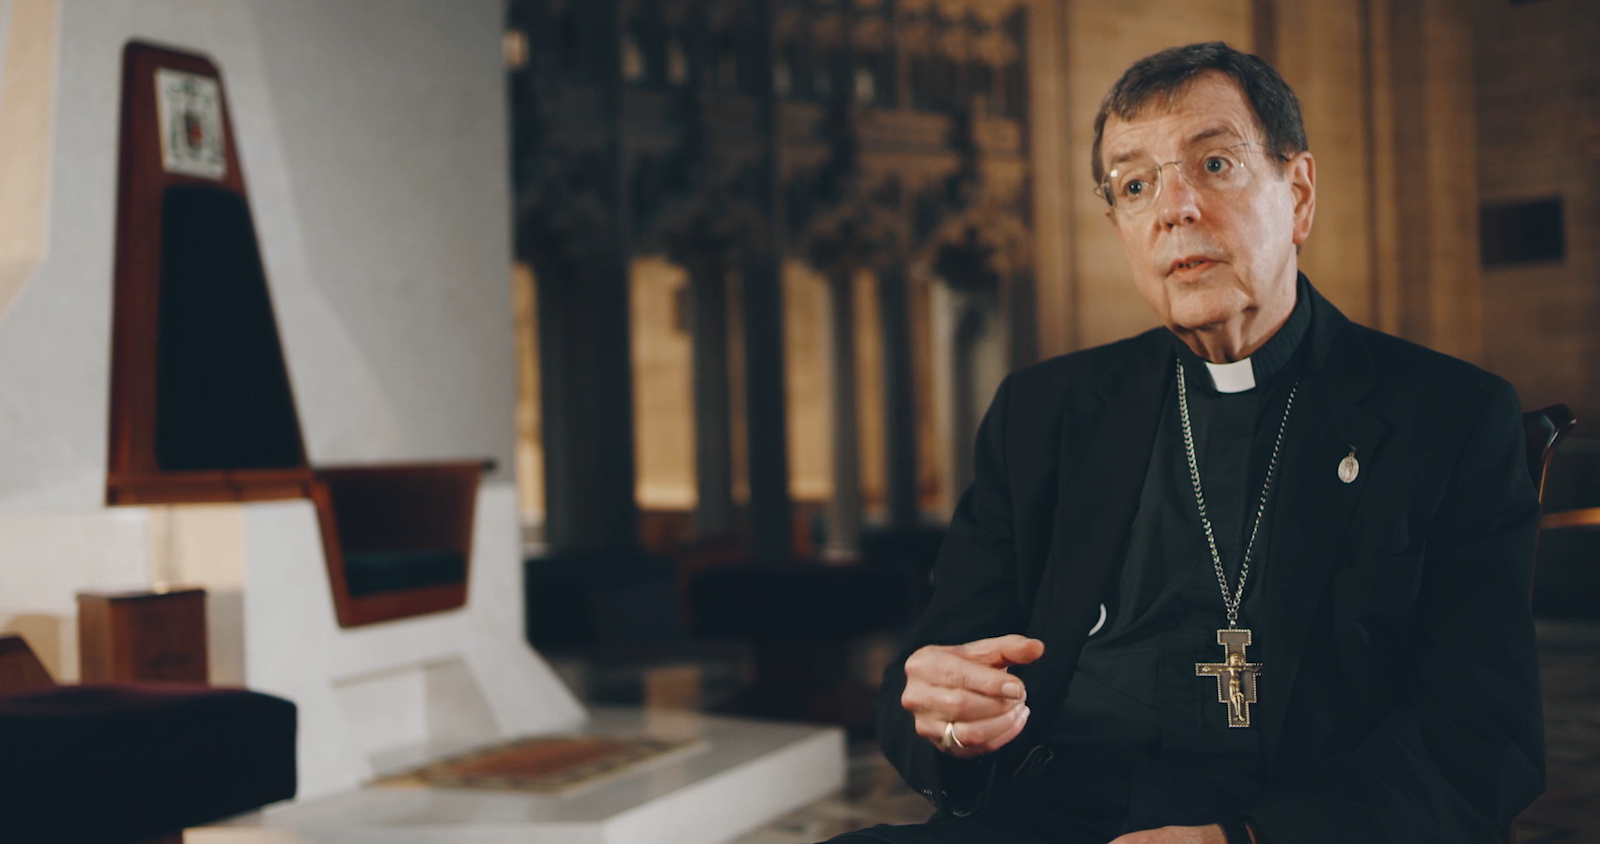 Archbishop Allen H. Vigneron is pictured in a scene from "The Chair," with his cathedra behind him at the Cathedral of the Most Blessed Sacrament. (Screengrab via DeSales Media)